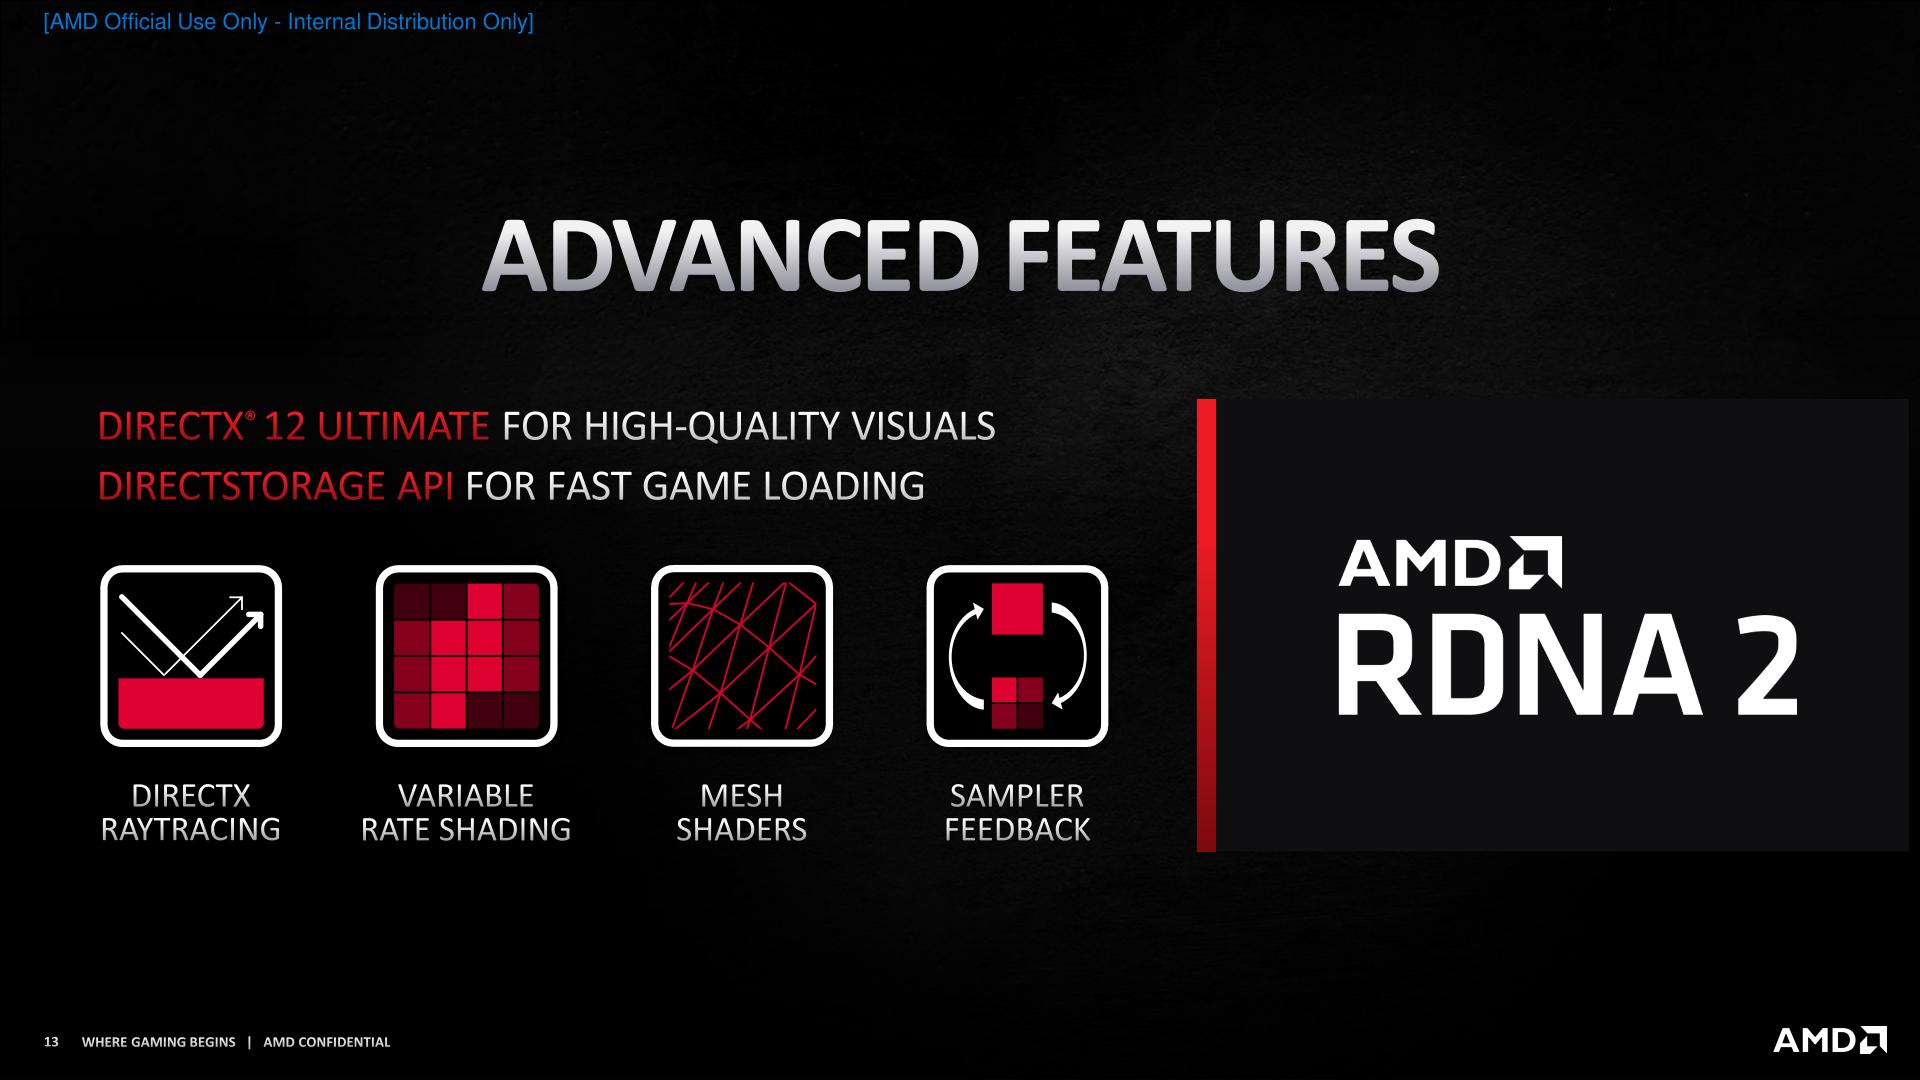 Rdna2 At A High Level Ray Tracing Infinity Cache A Whole Lot Of Clockspeed Amd Reveals The Radeon Rx 6000 Series Rdna2 Starts At The High End Coming November 18th